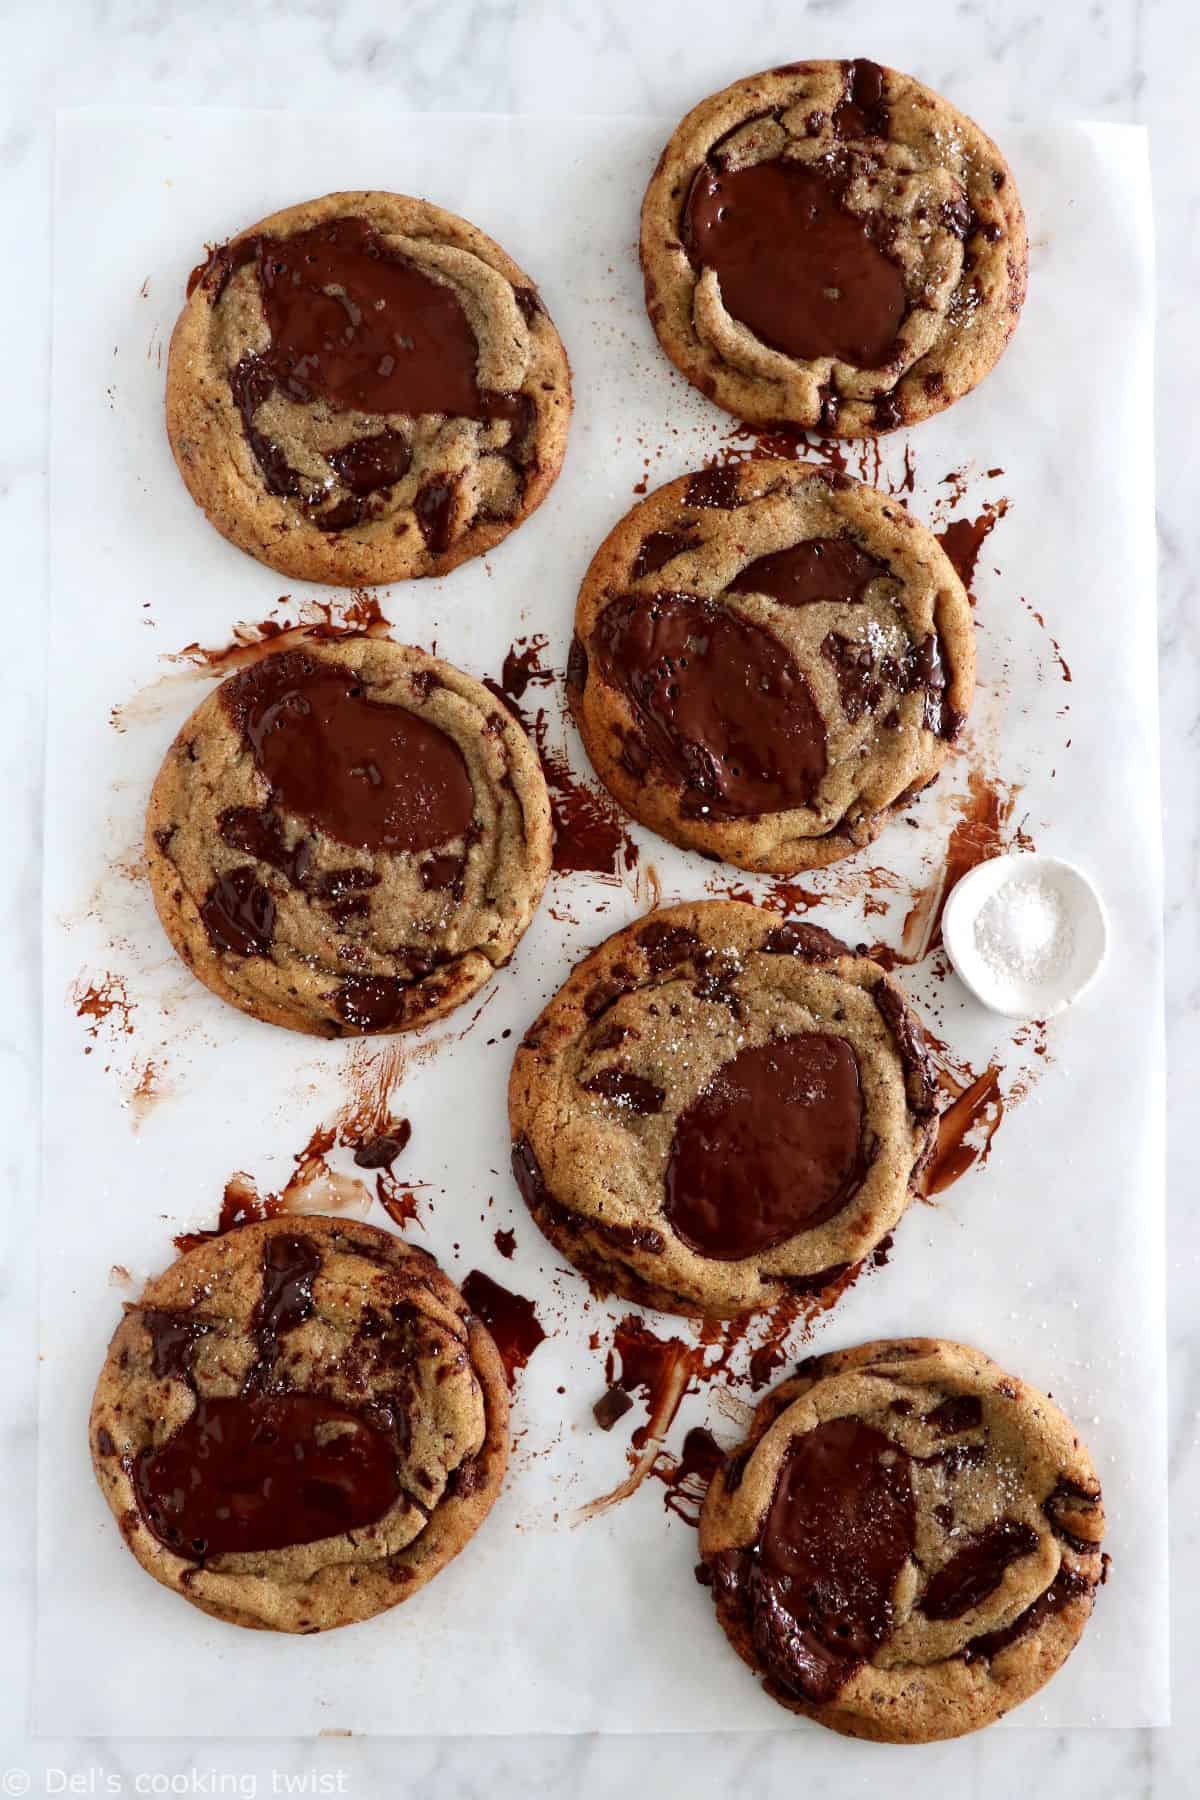 Espresso brown butter chocolate chunk cookies are buttery, chewy and slightly crispy, oozing with chocolate and intense espresso flavors.